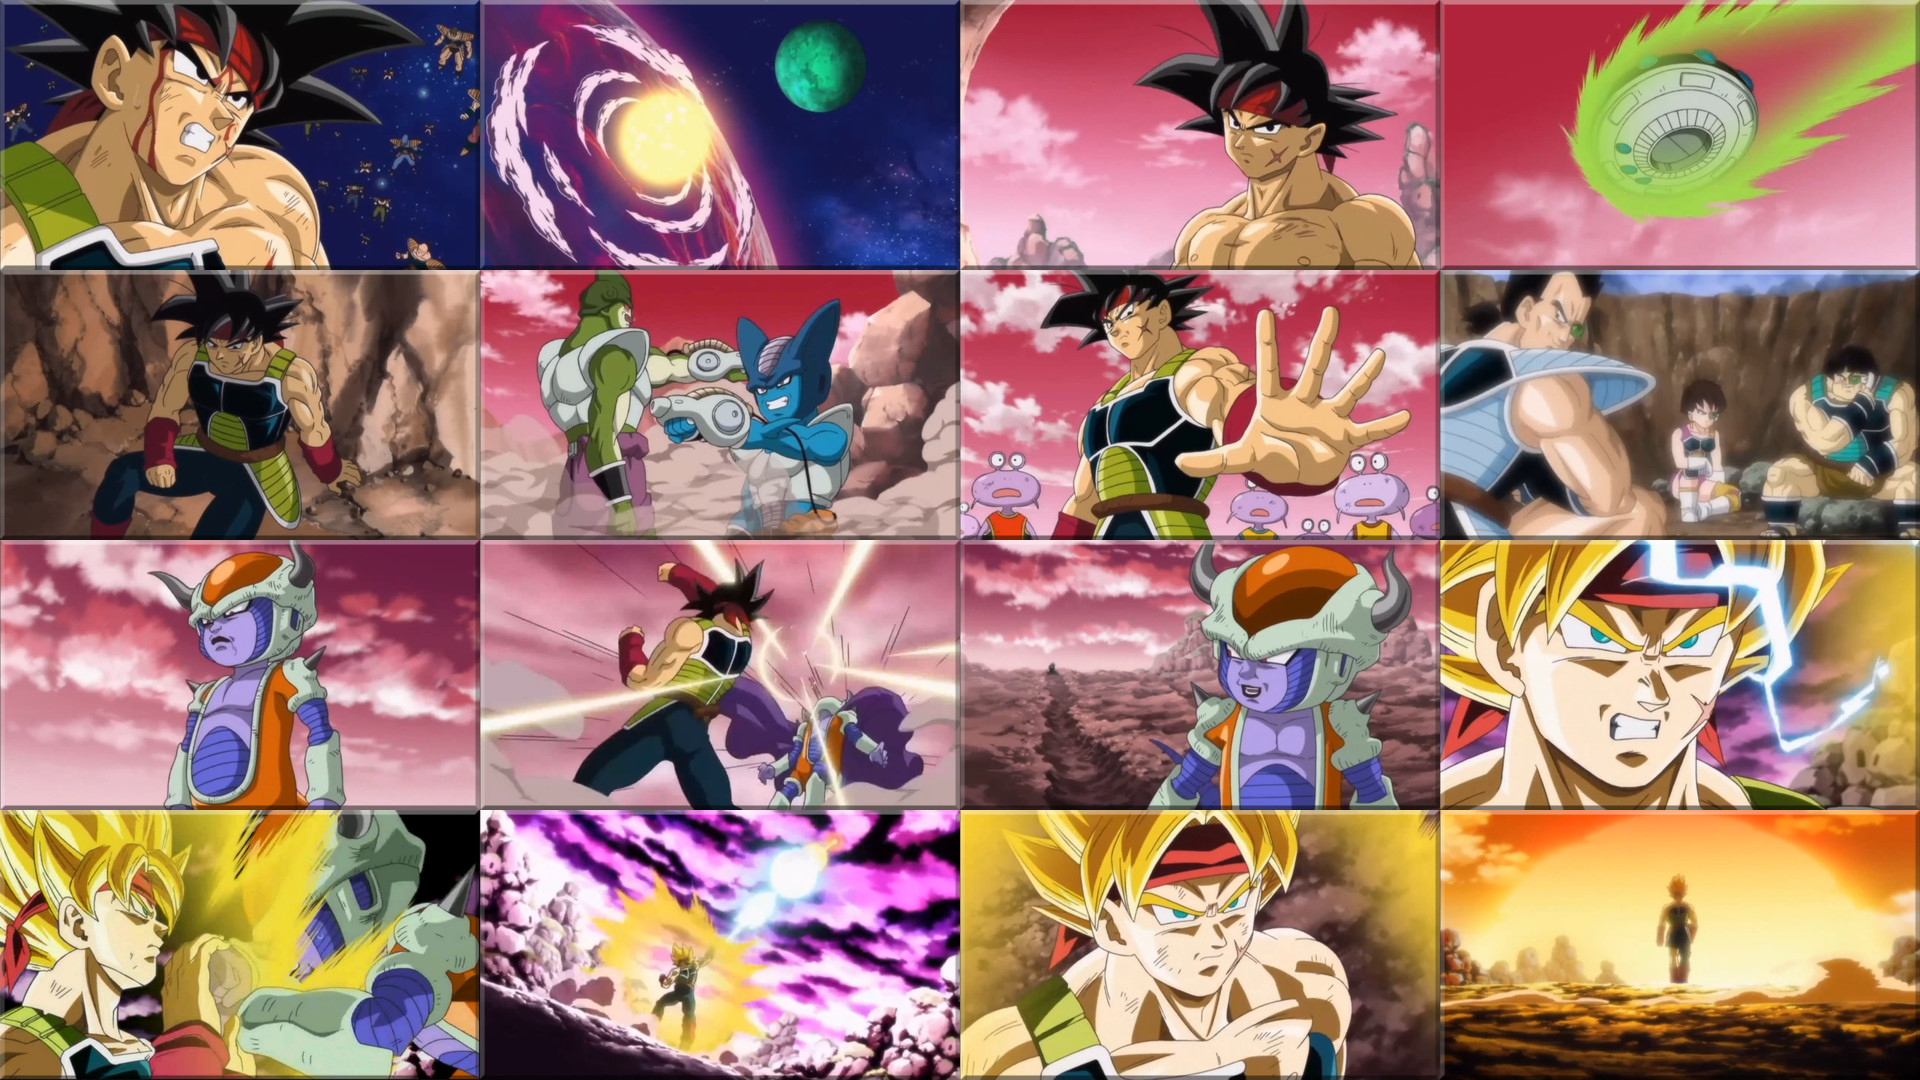 1920x1080 ... Dragon Ball Z - Episode of Bardock by GT4tube